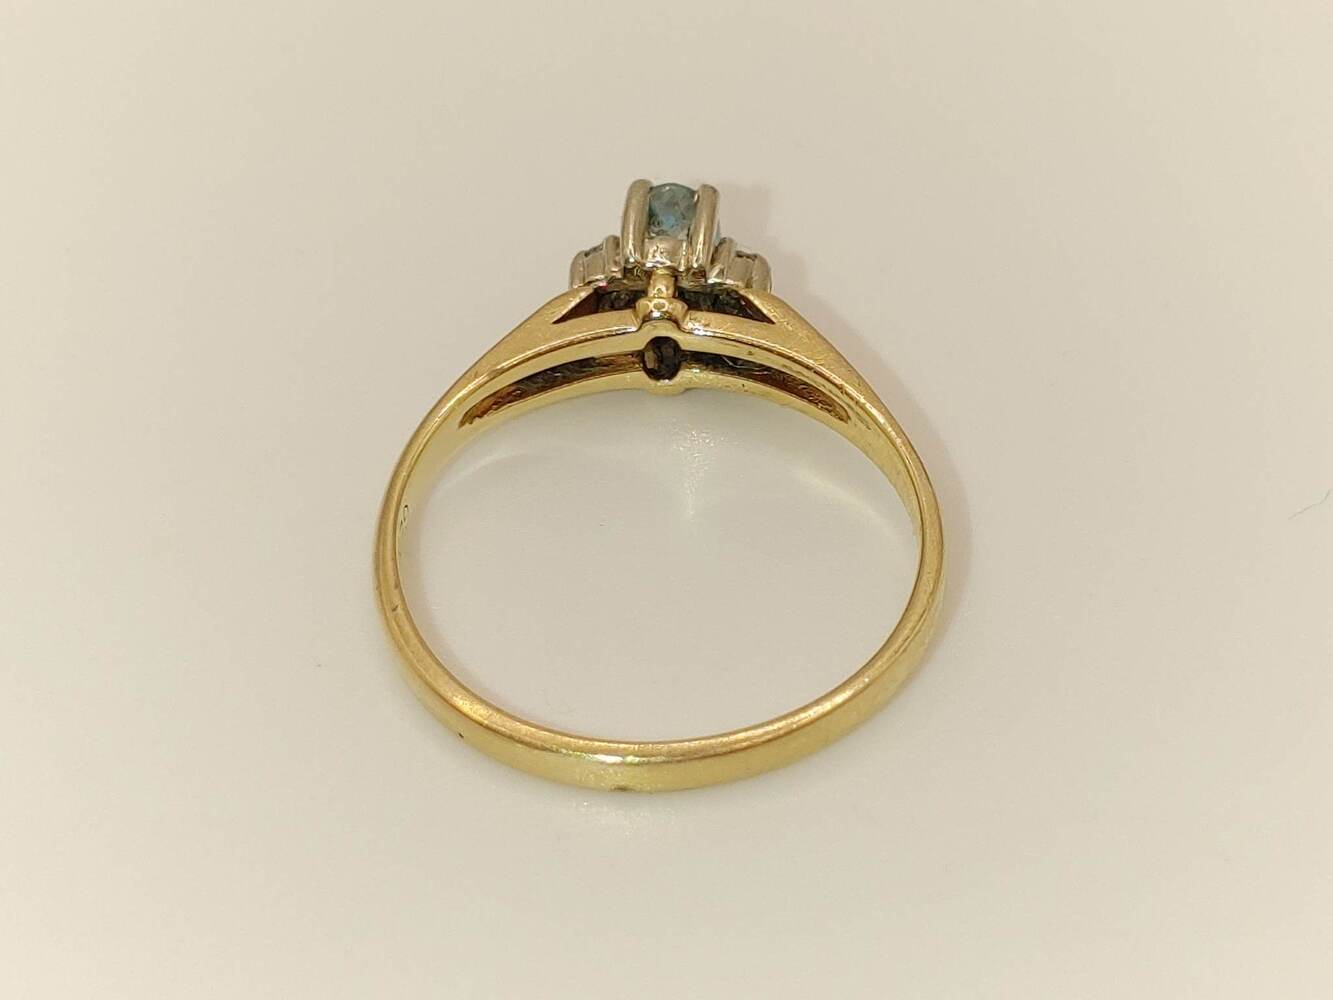 Lady's 10 Karat Yellow Gold Ring with Light Blue Oval Ring